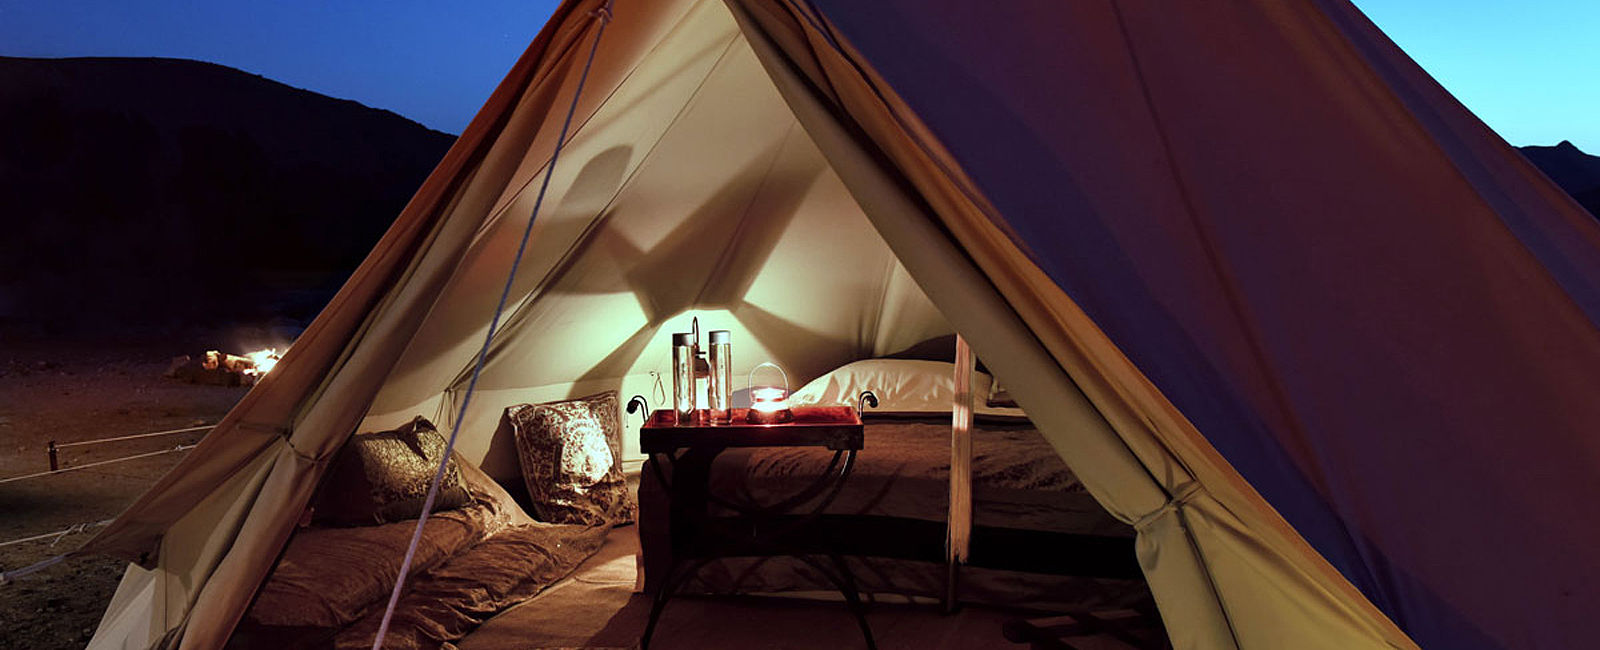 GRATULANTEN
 Glamping at it's best 
